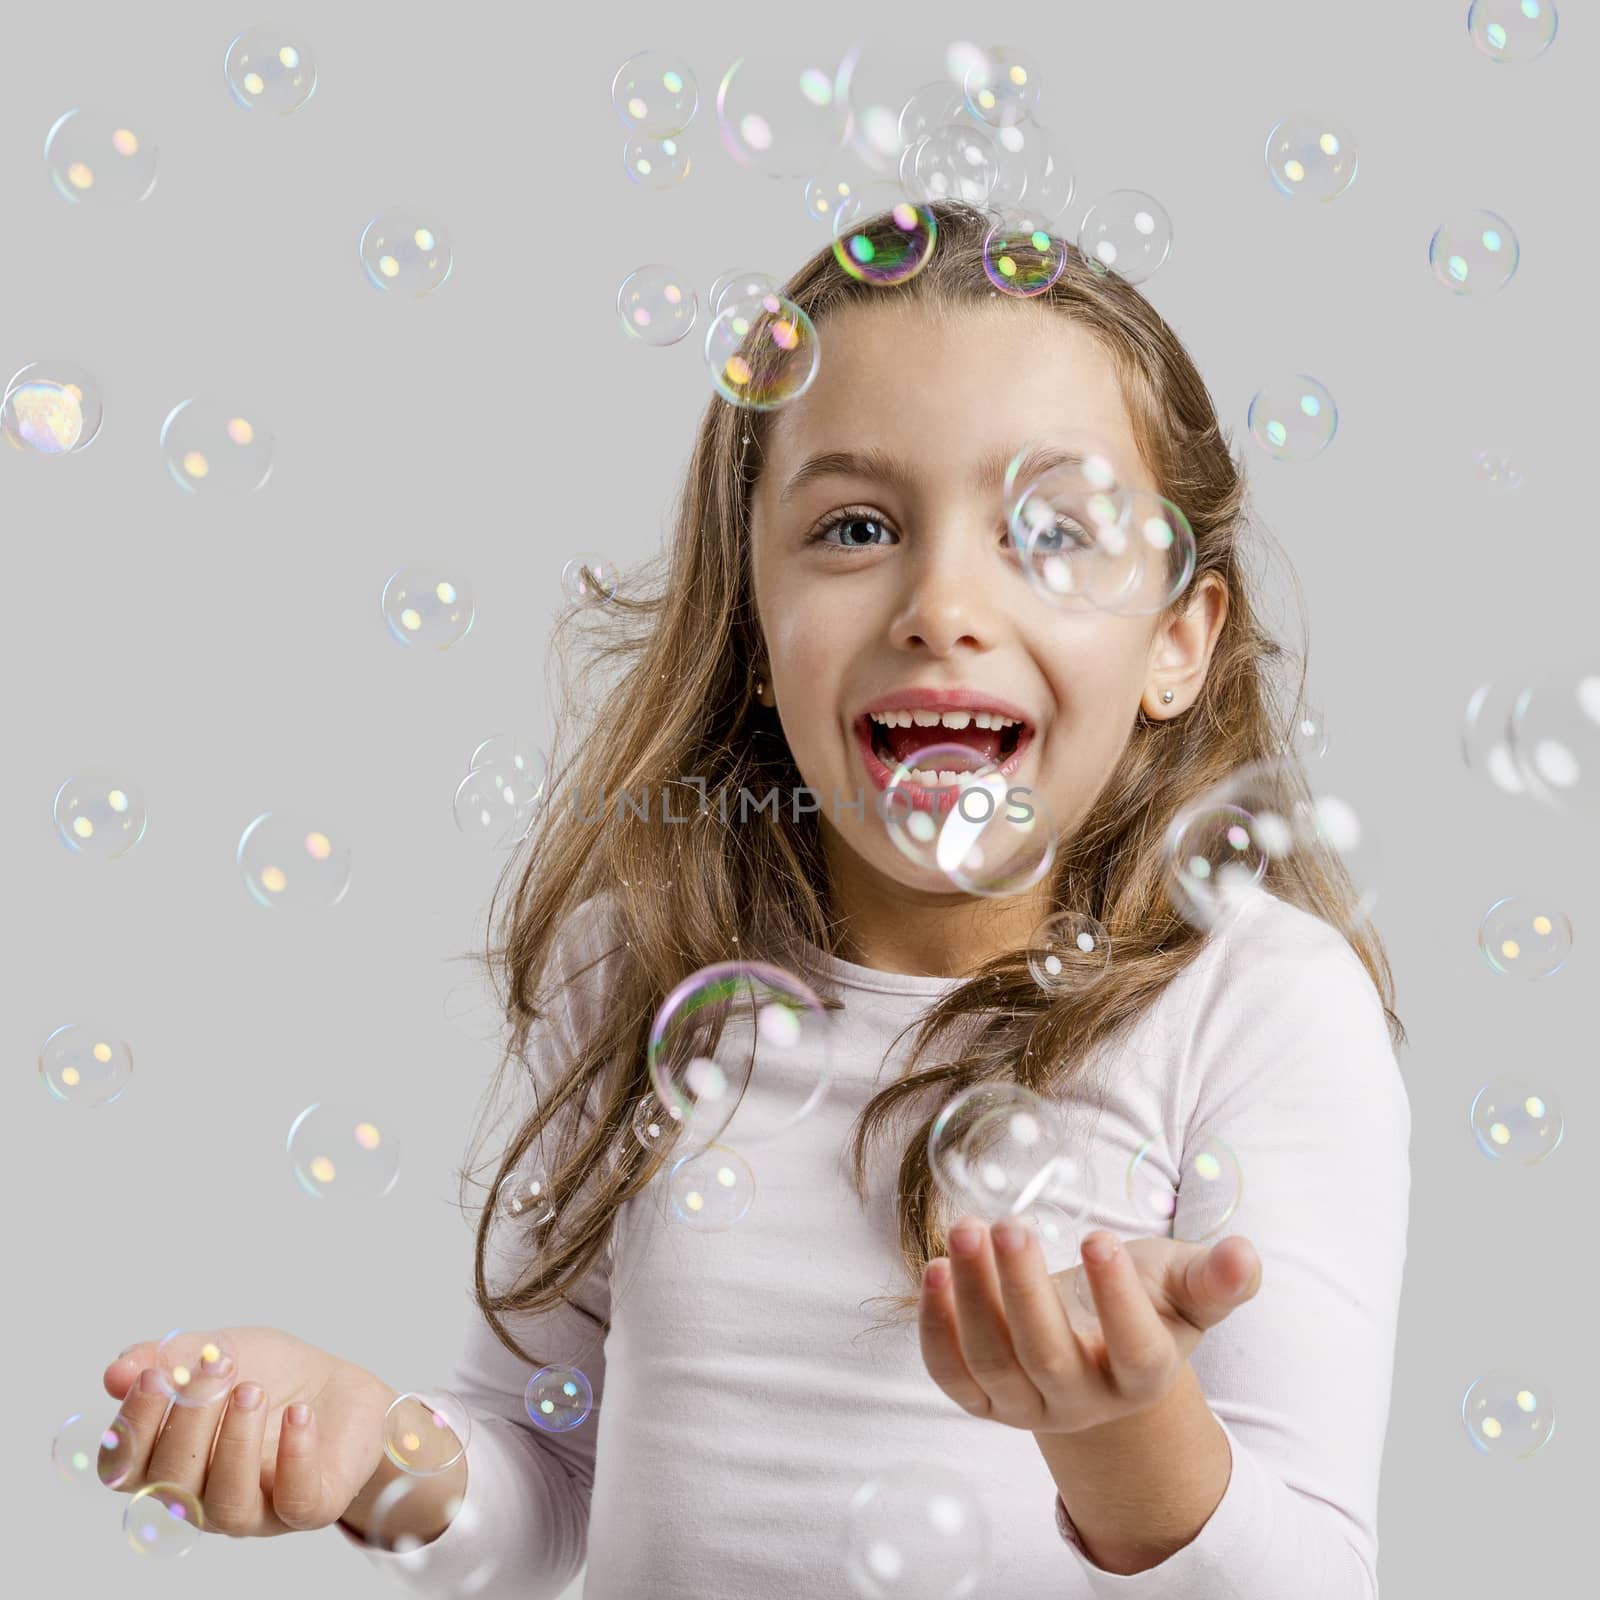 Girl playing with soap bubbles by Iko